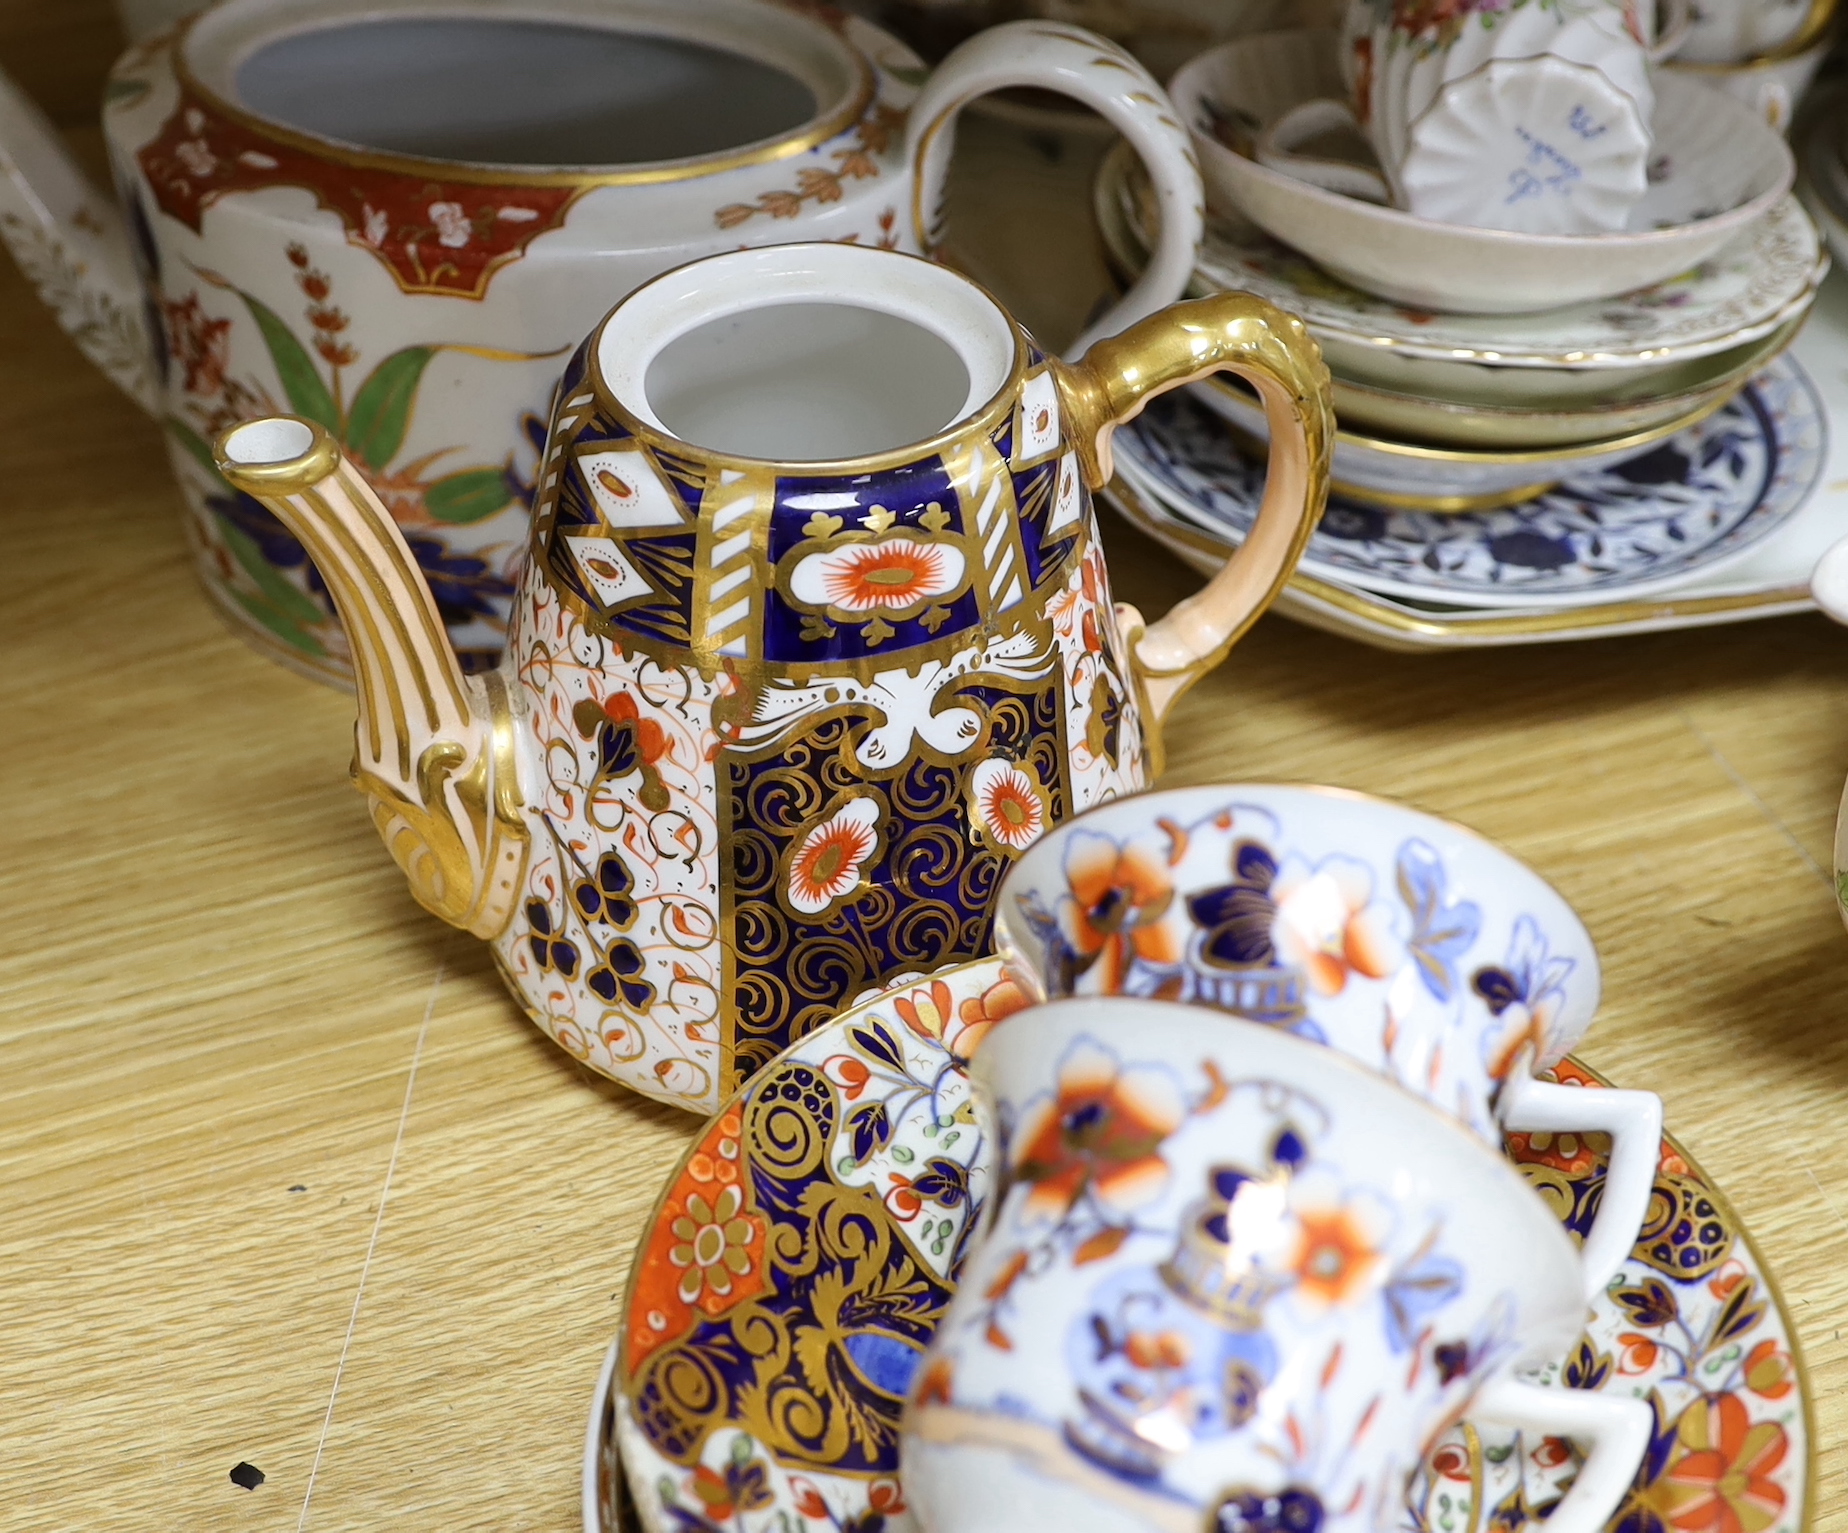 An early 19th century Newhall type tea set, pattern 95, mixed continental tea ware and Imari patterned tea wares